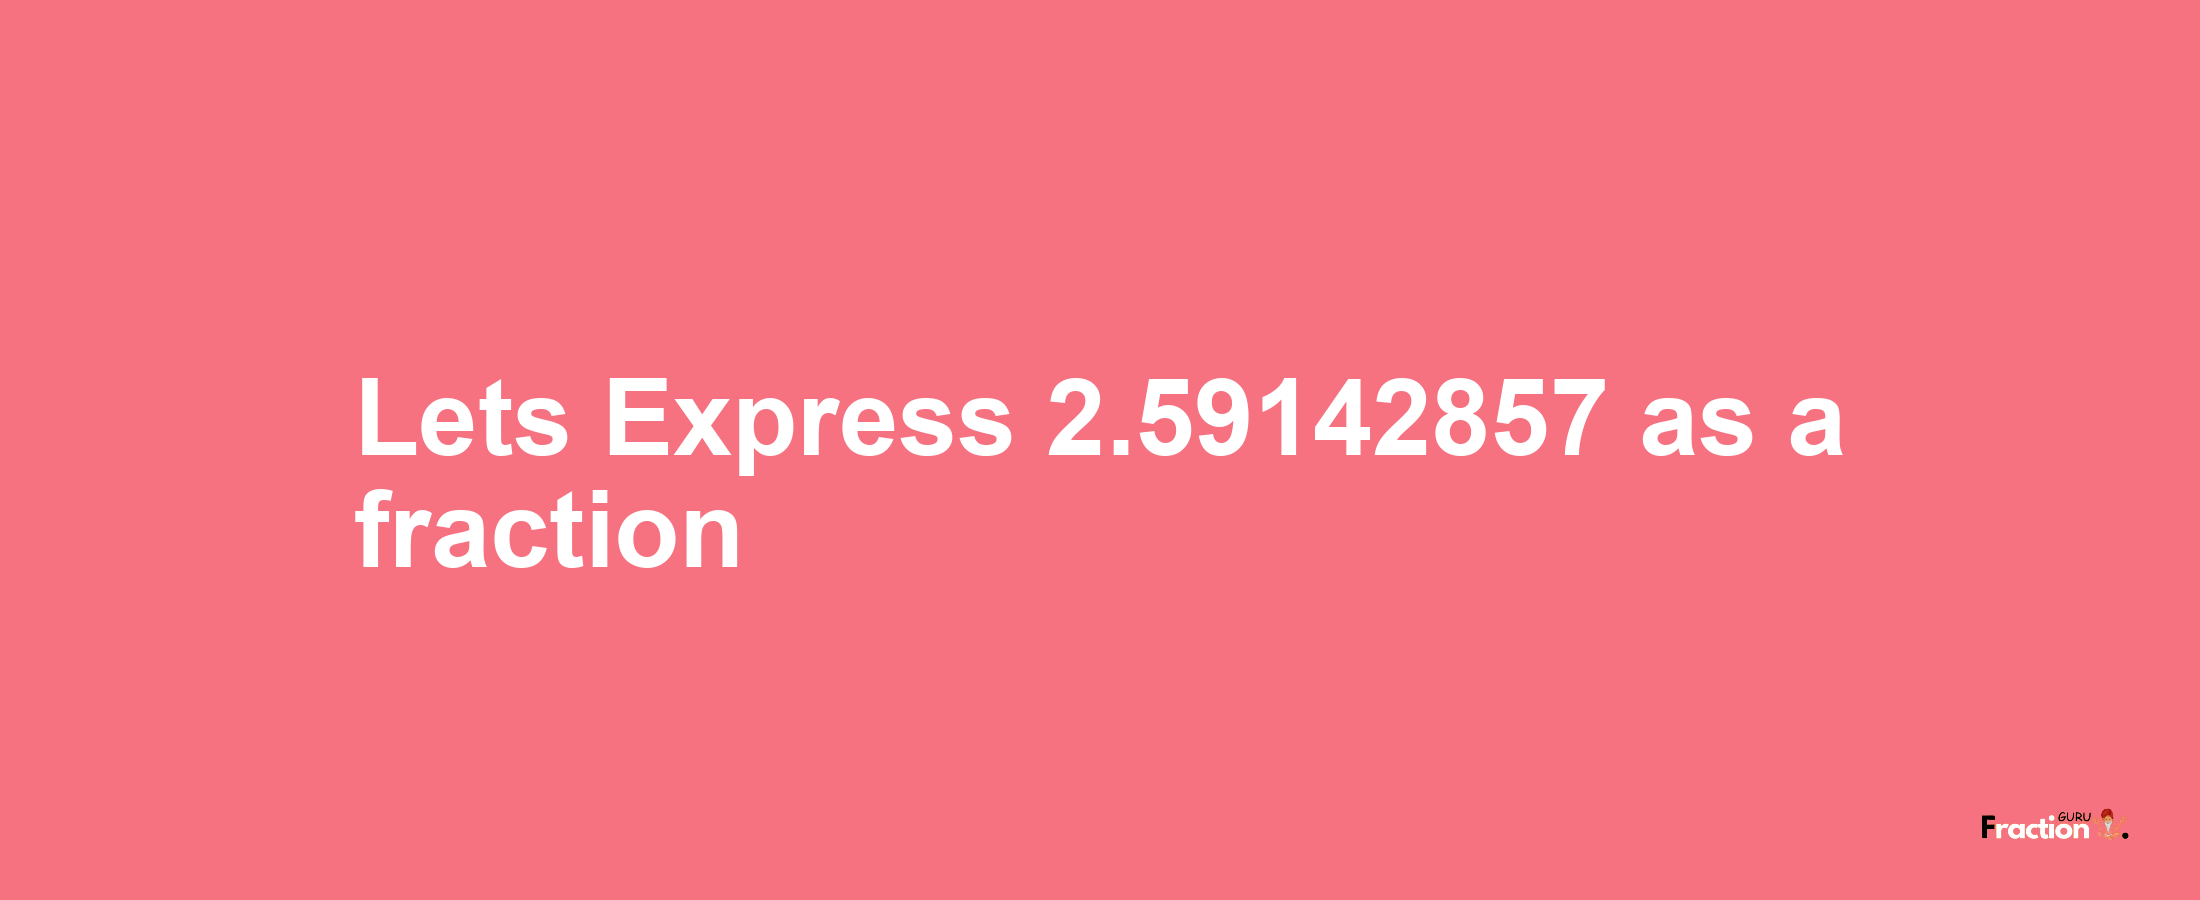 Lets Express 2.59142857 as afraction